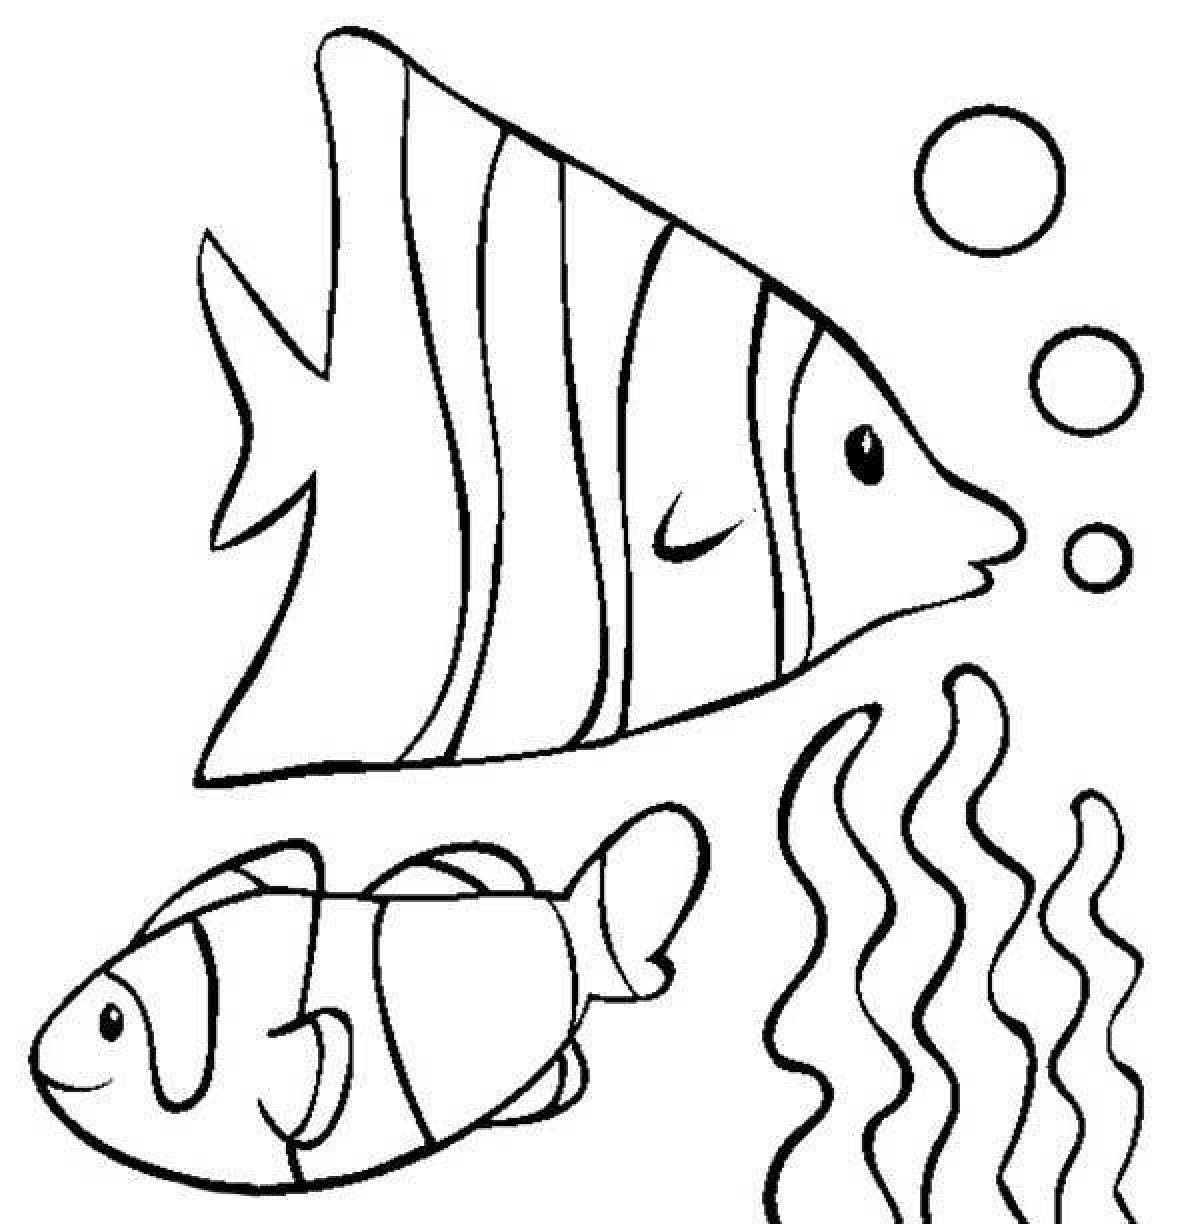 Adorable fish coloring book for 6-7 year olds